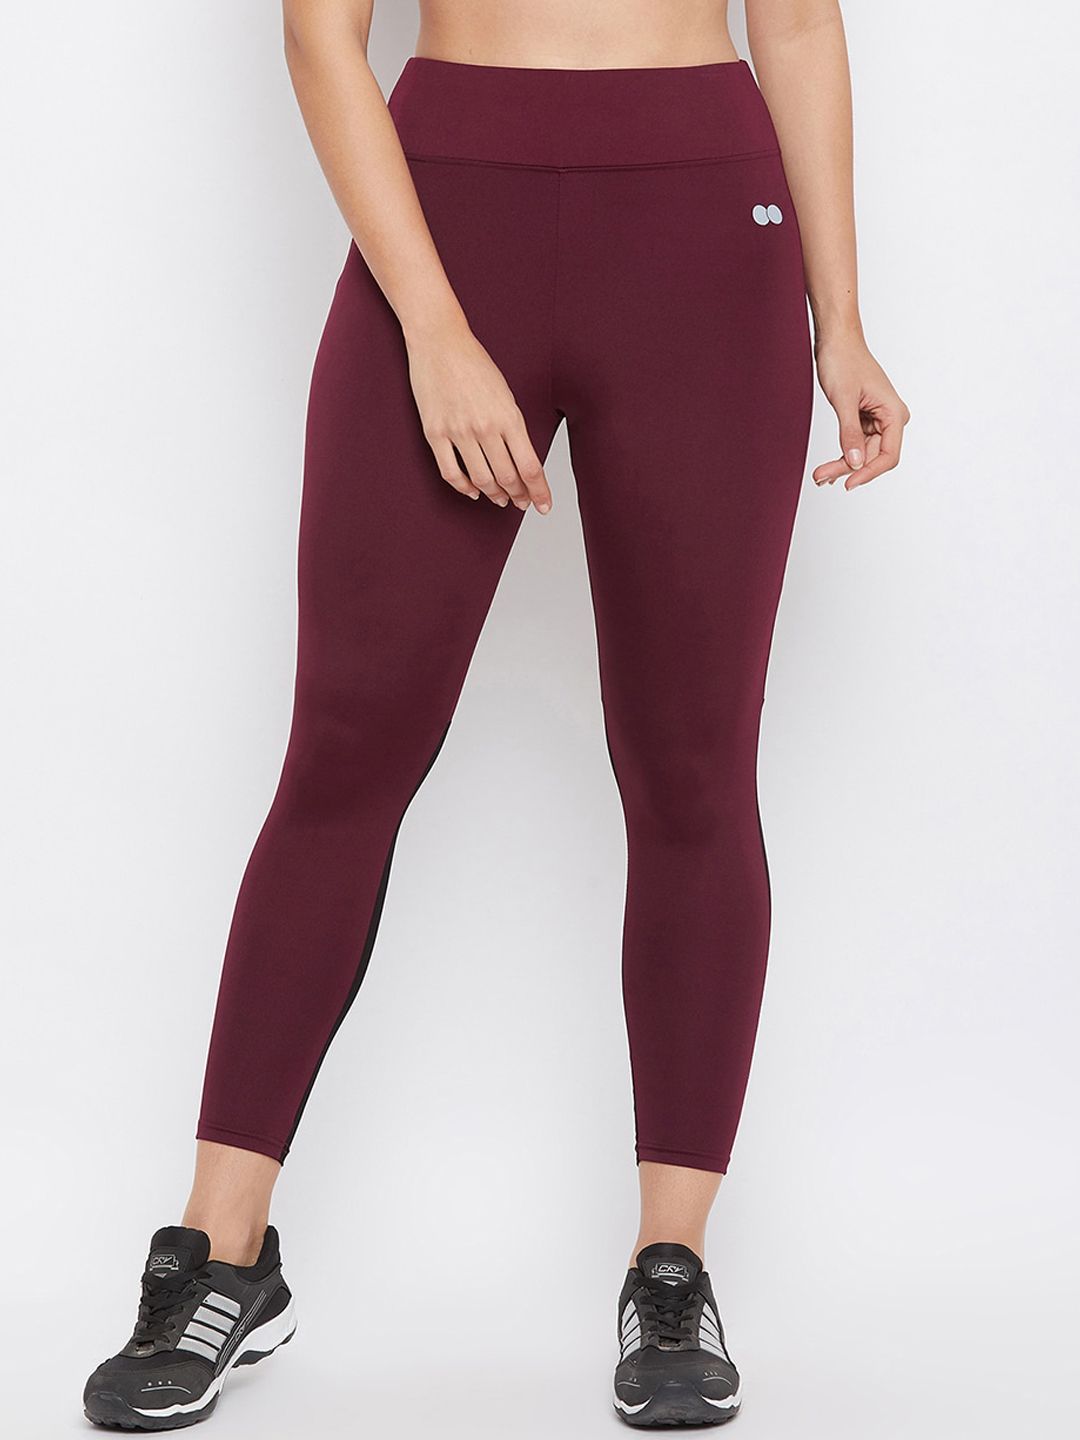 Clovia Women Maroon Solid Ankle-Length Sports Tights Price in India